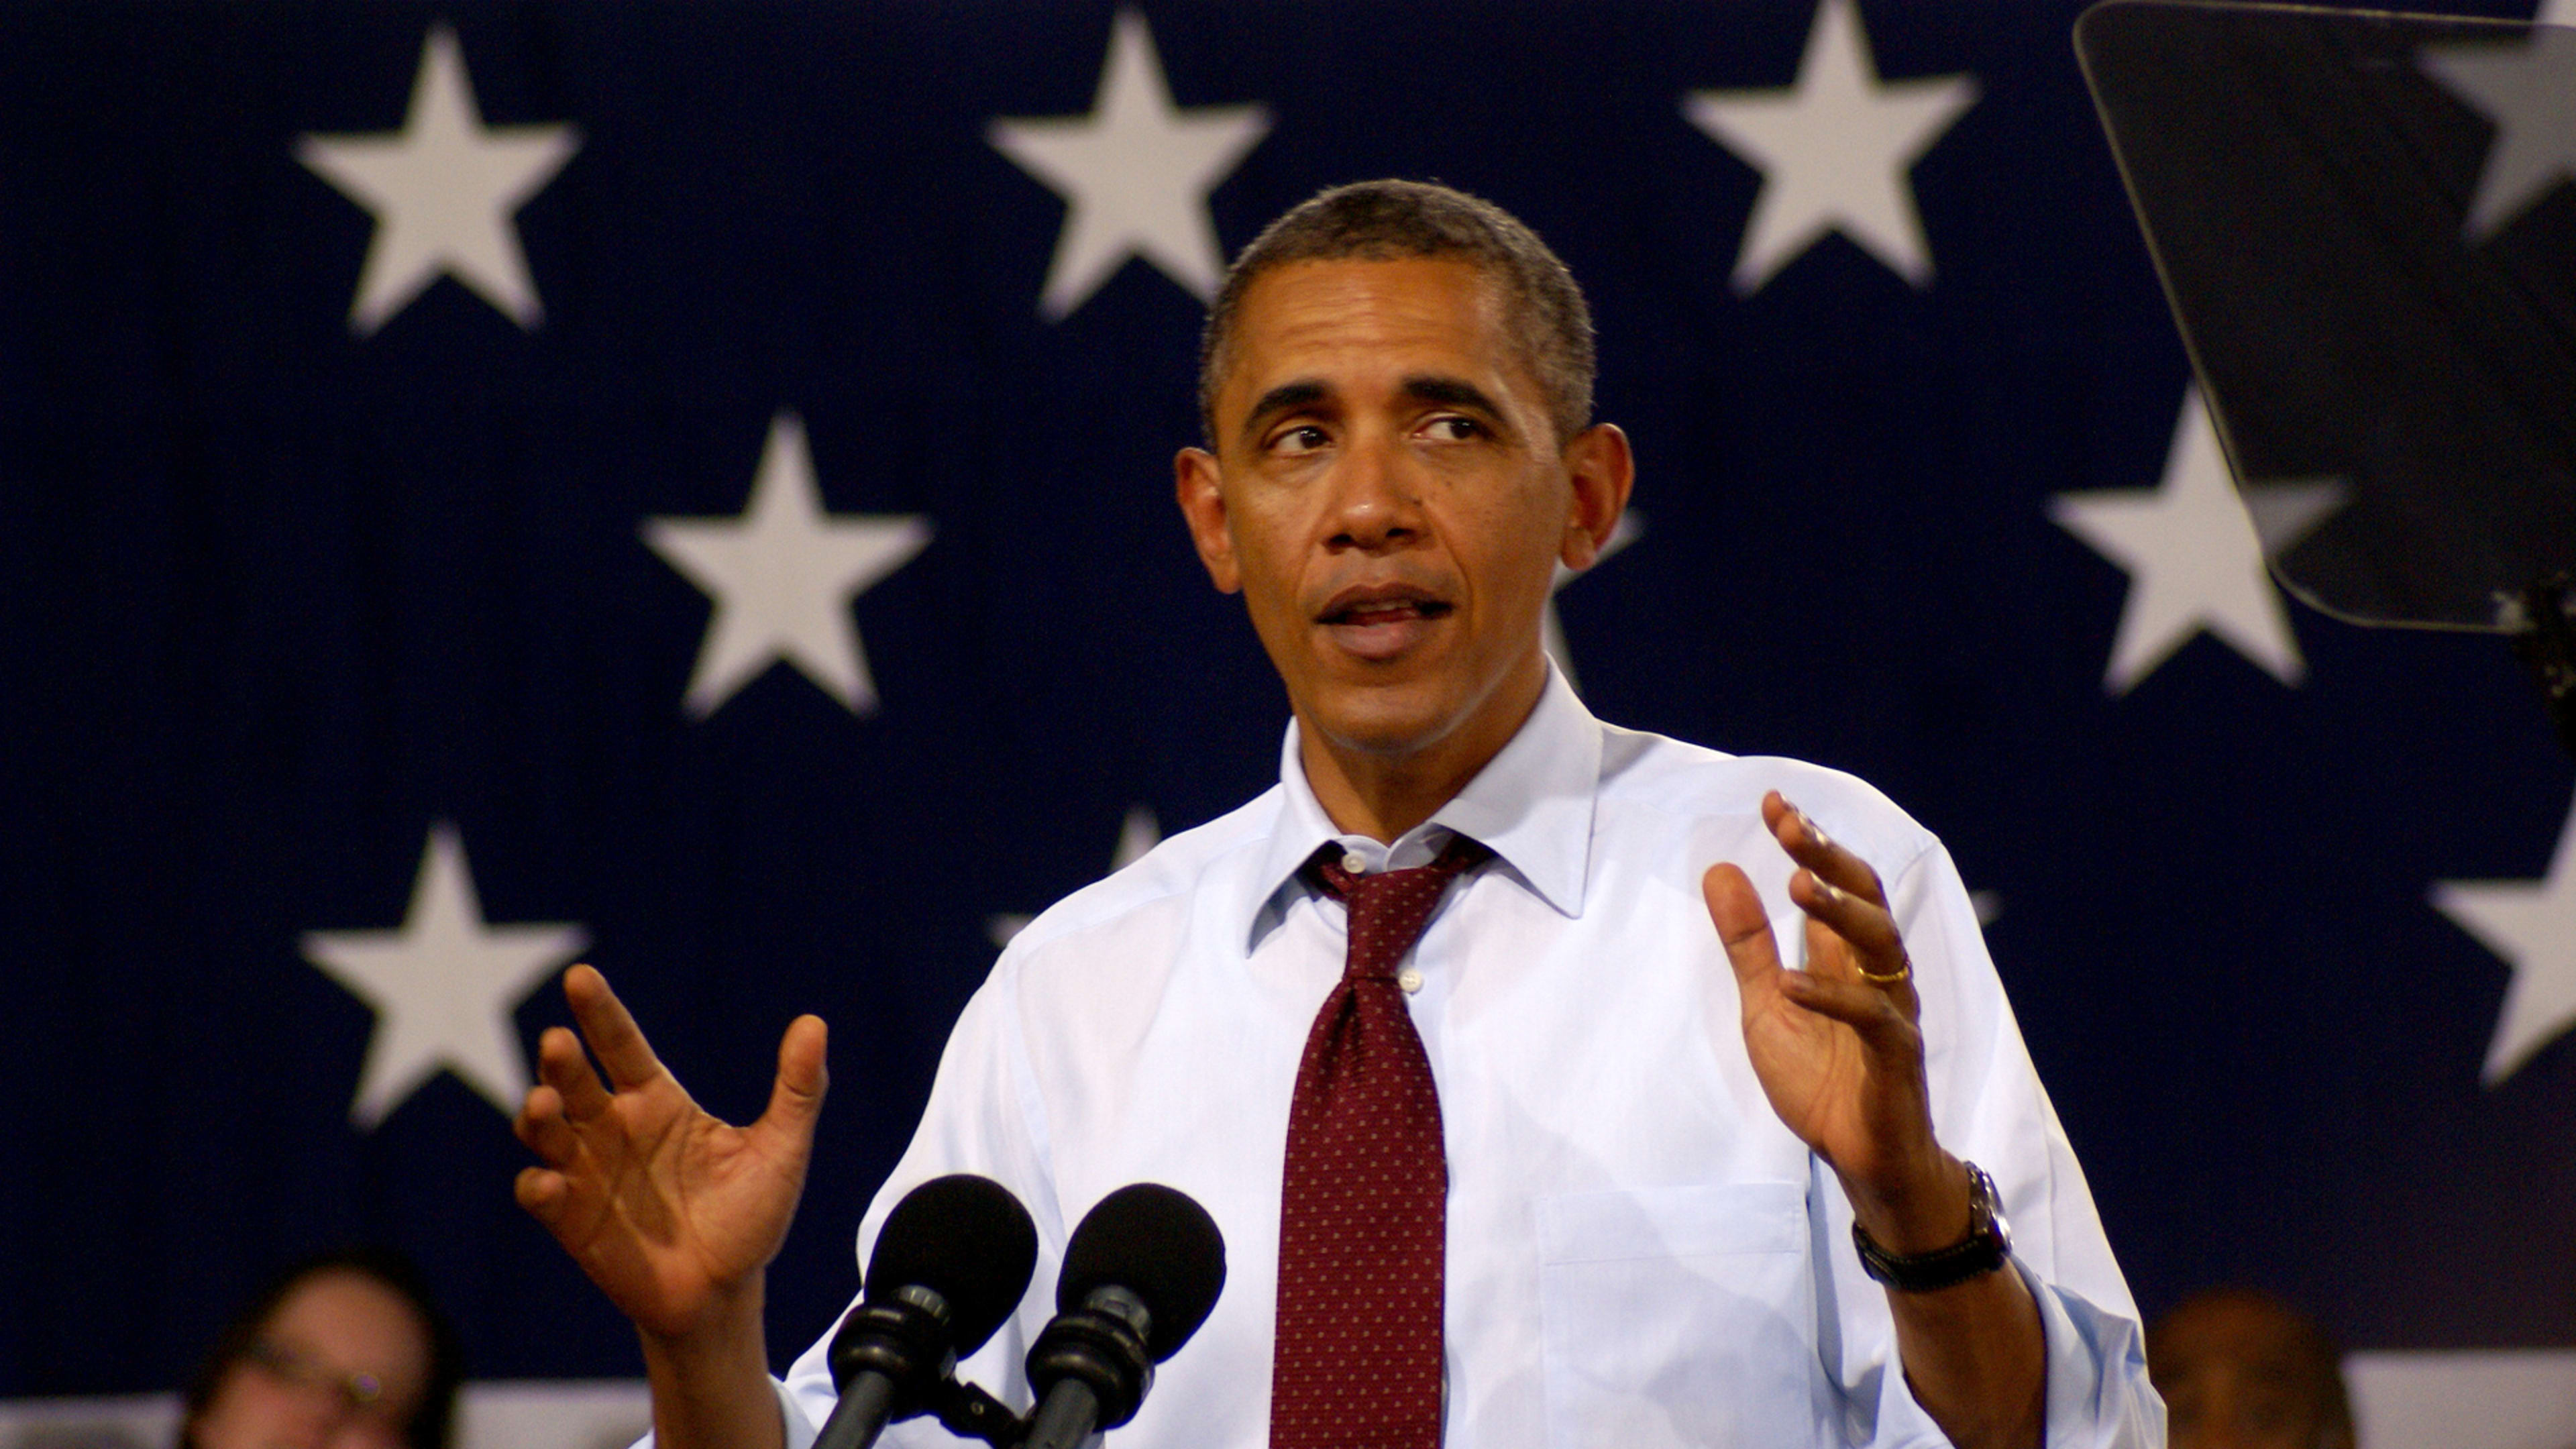 It’s not just dead people–even “Barack Obama” urged an end to net neutrality